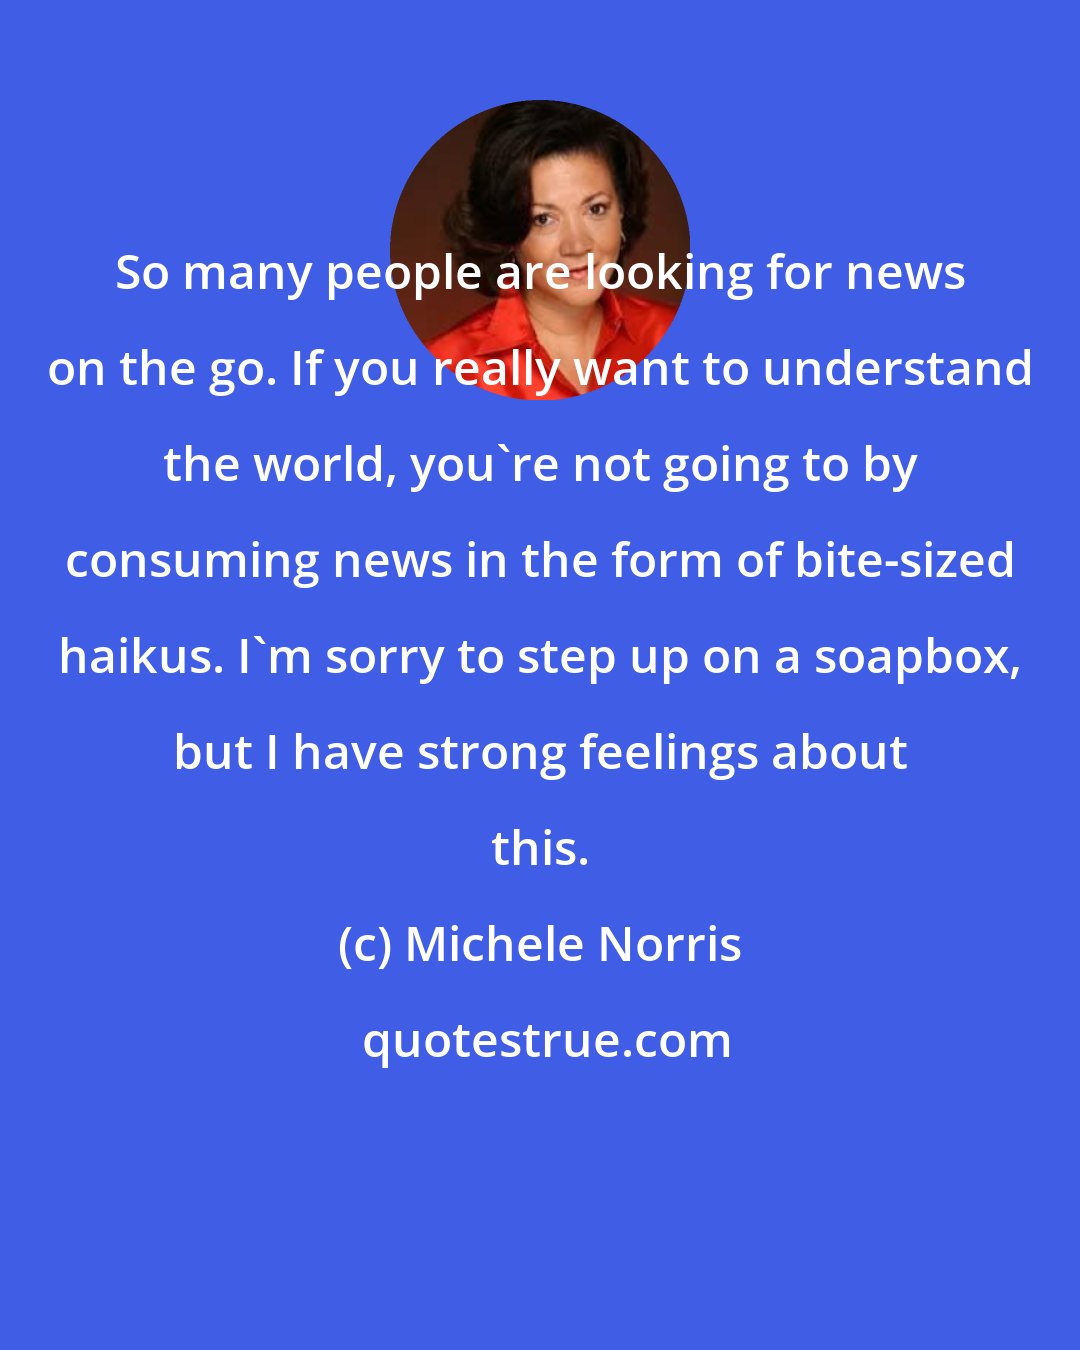 Michele Norris: So many people are looking for news on the go. If you really want to understand the world, you're not going to by consuming news in the form of bite-sized haikus. I'm sorry to step up on a soapbox, but I have strong feelings about this.